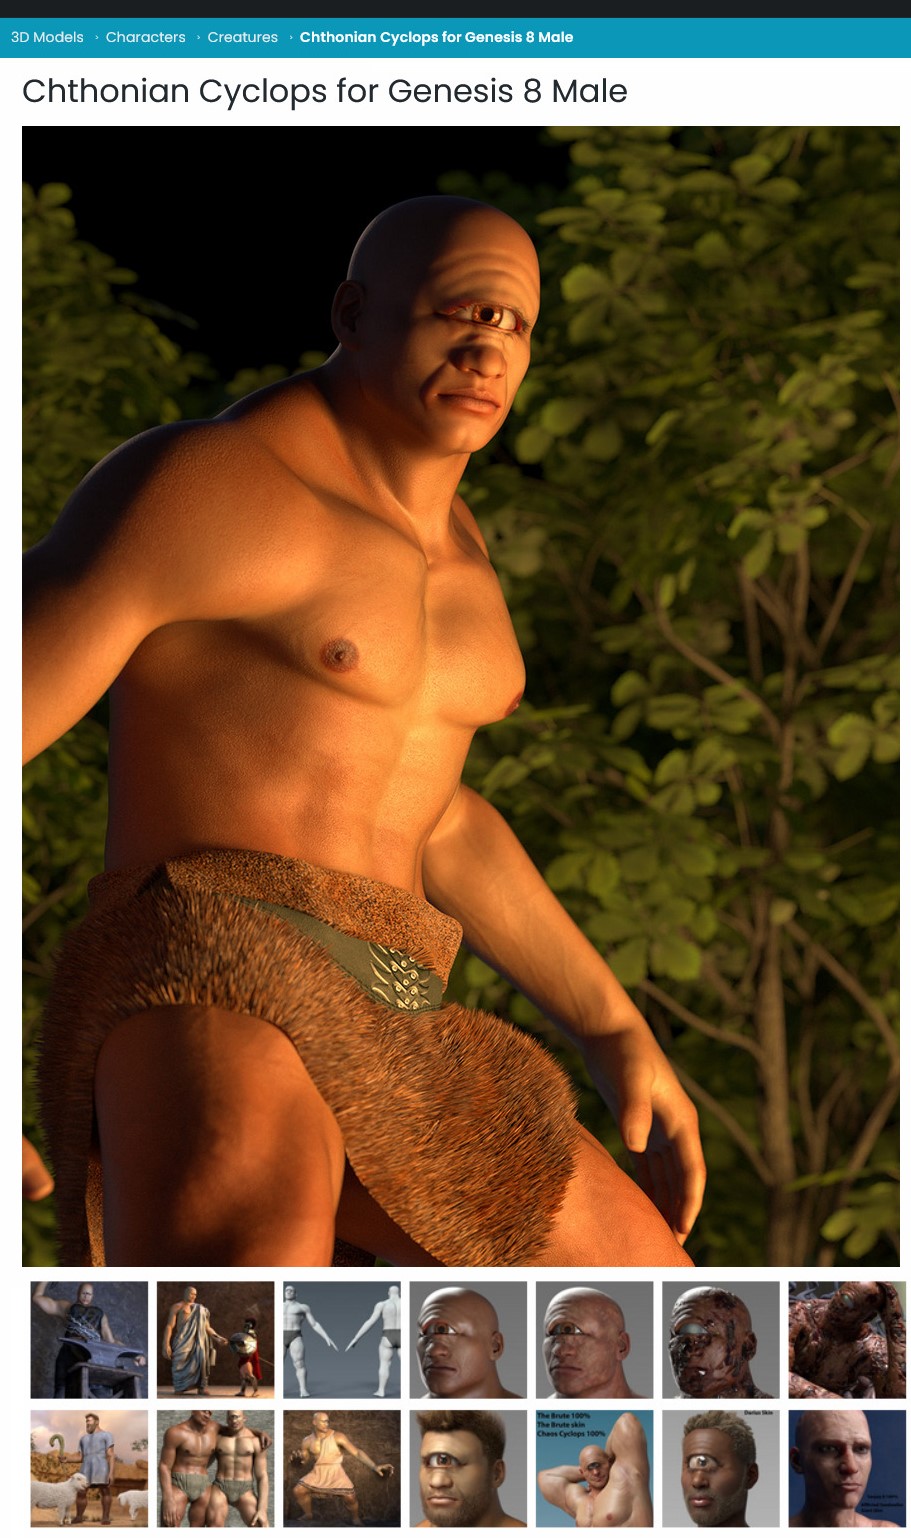 Chthonian Cyclops for Genesis 8 Male